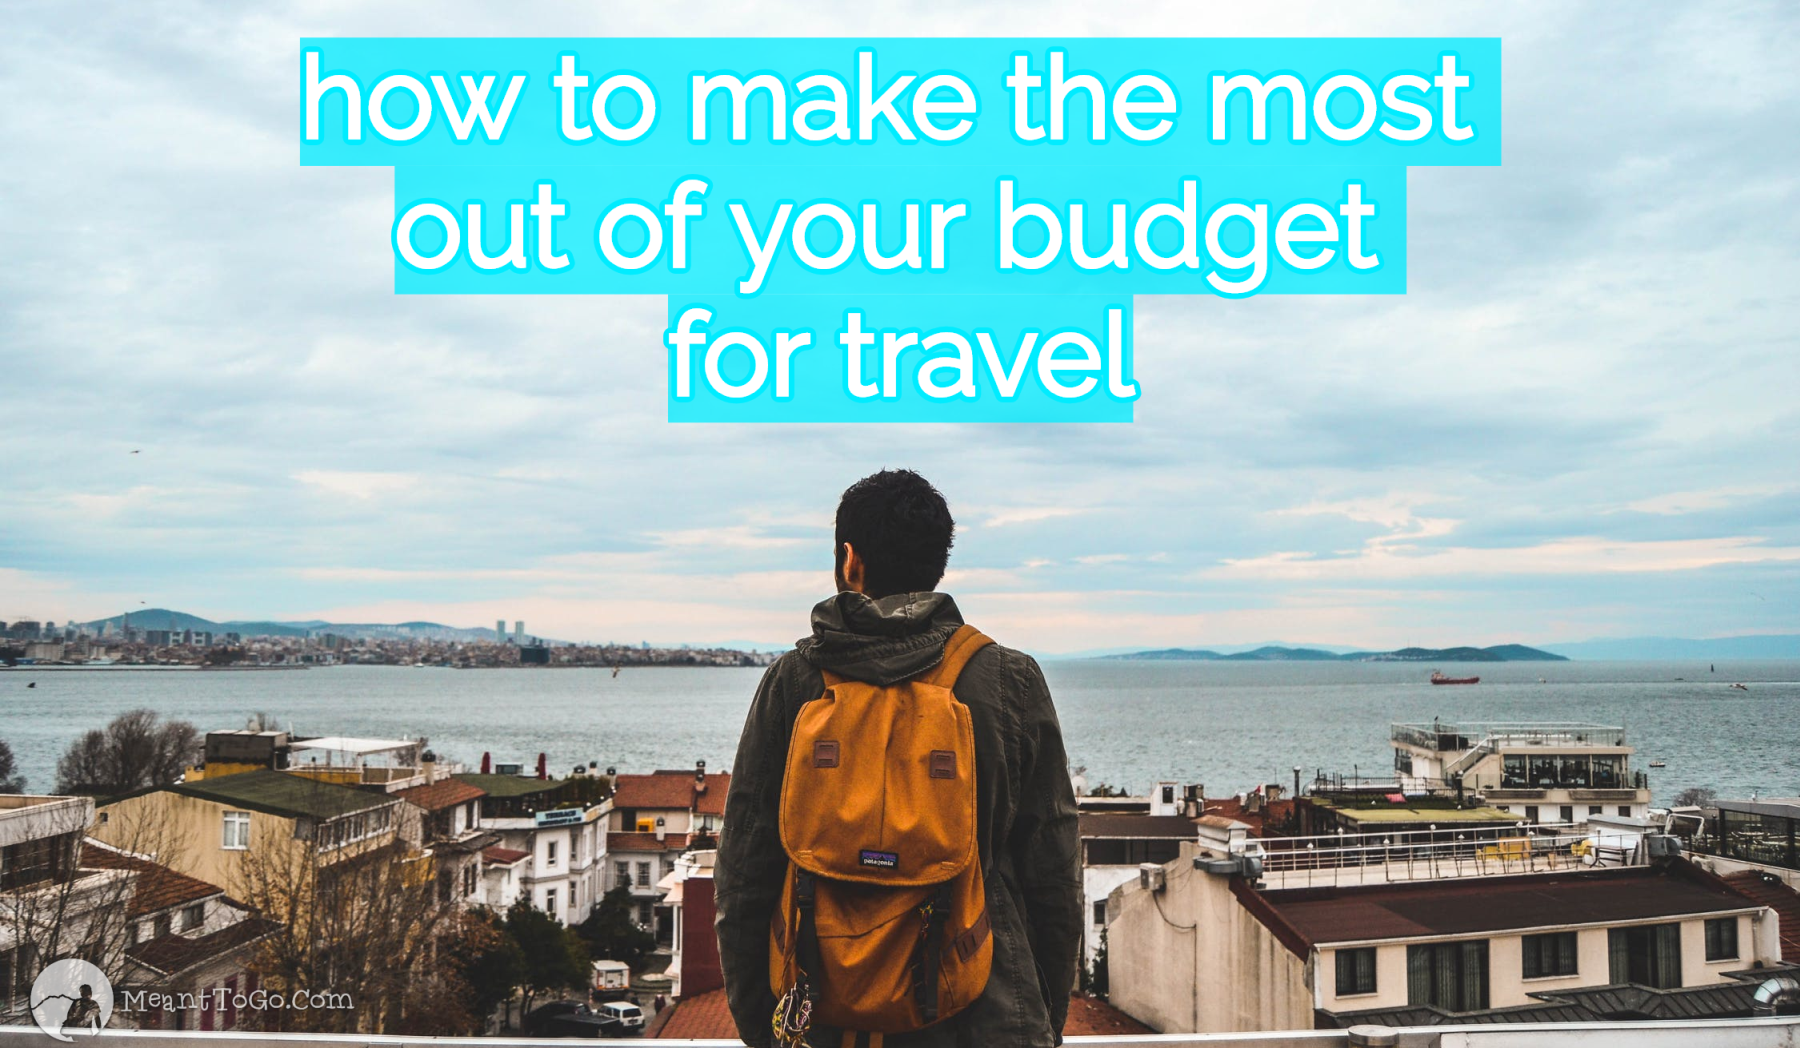 How You Can Make The Most Out Of Your Budget For Travel (And Travel More)